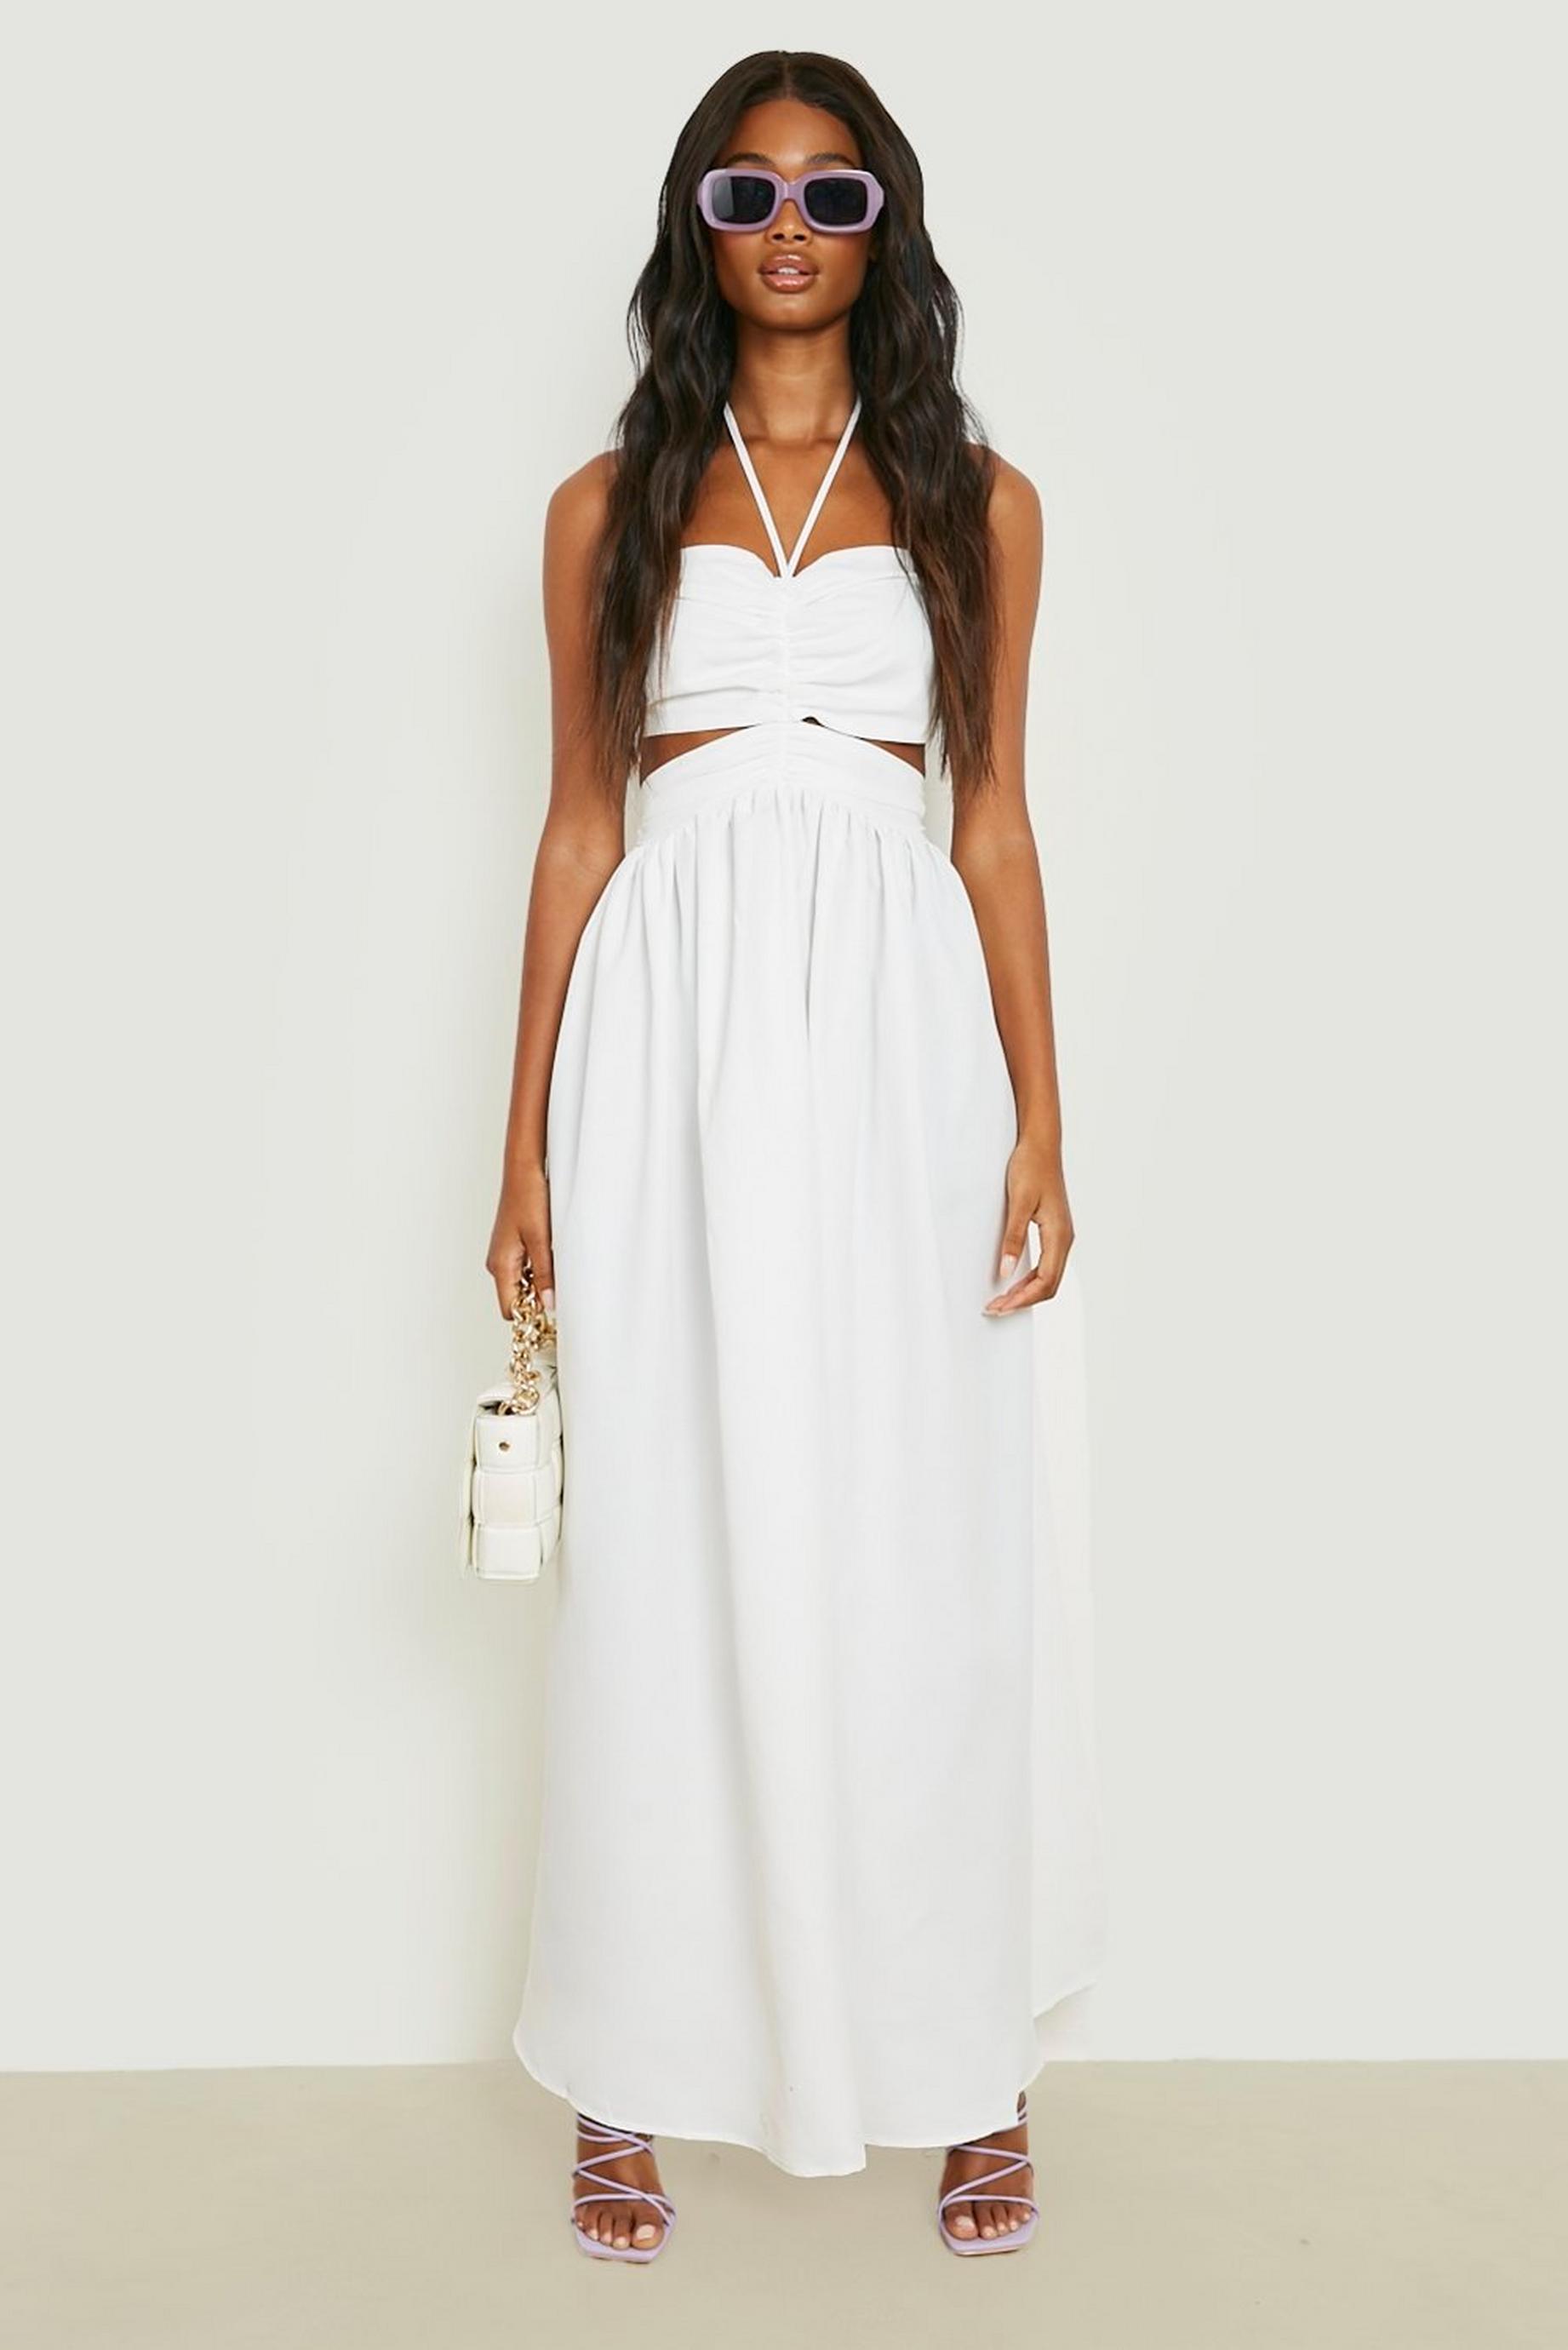 Strappy Halterneck Cut Out Maxi Dress